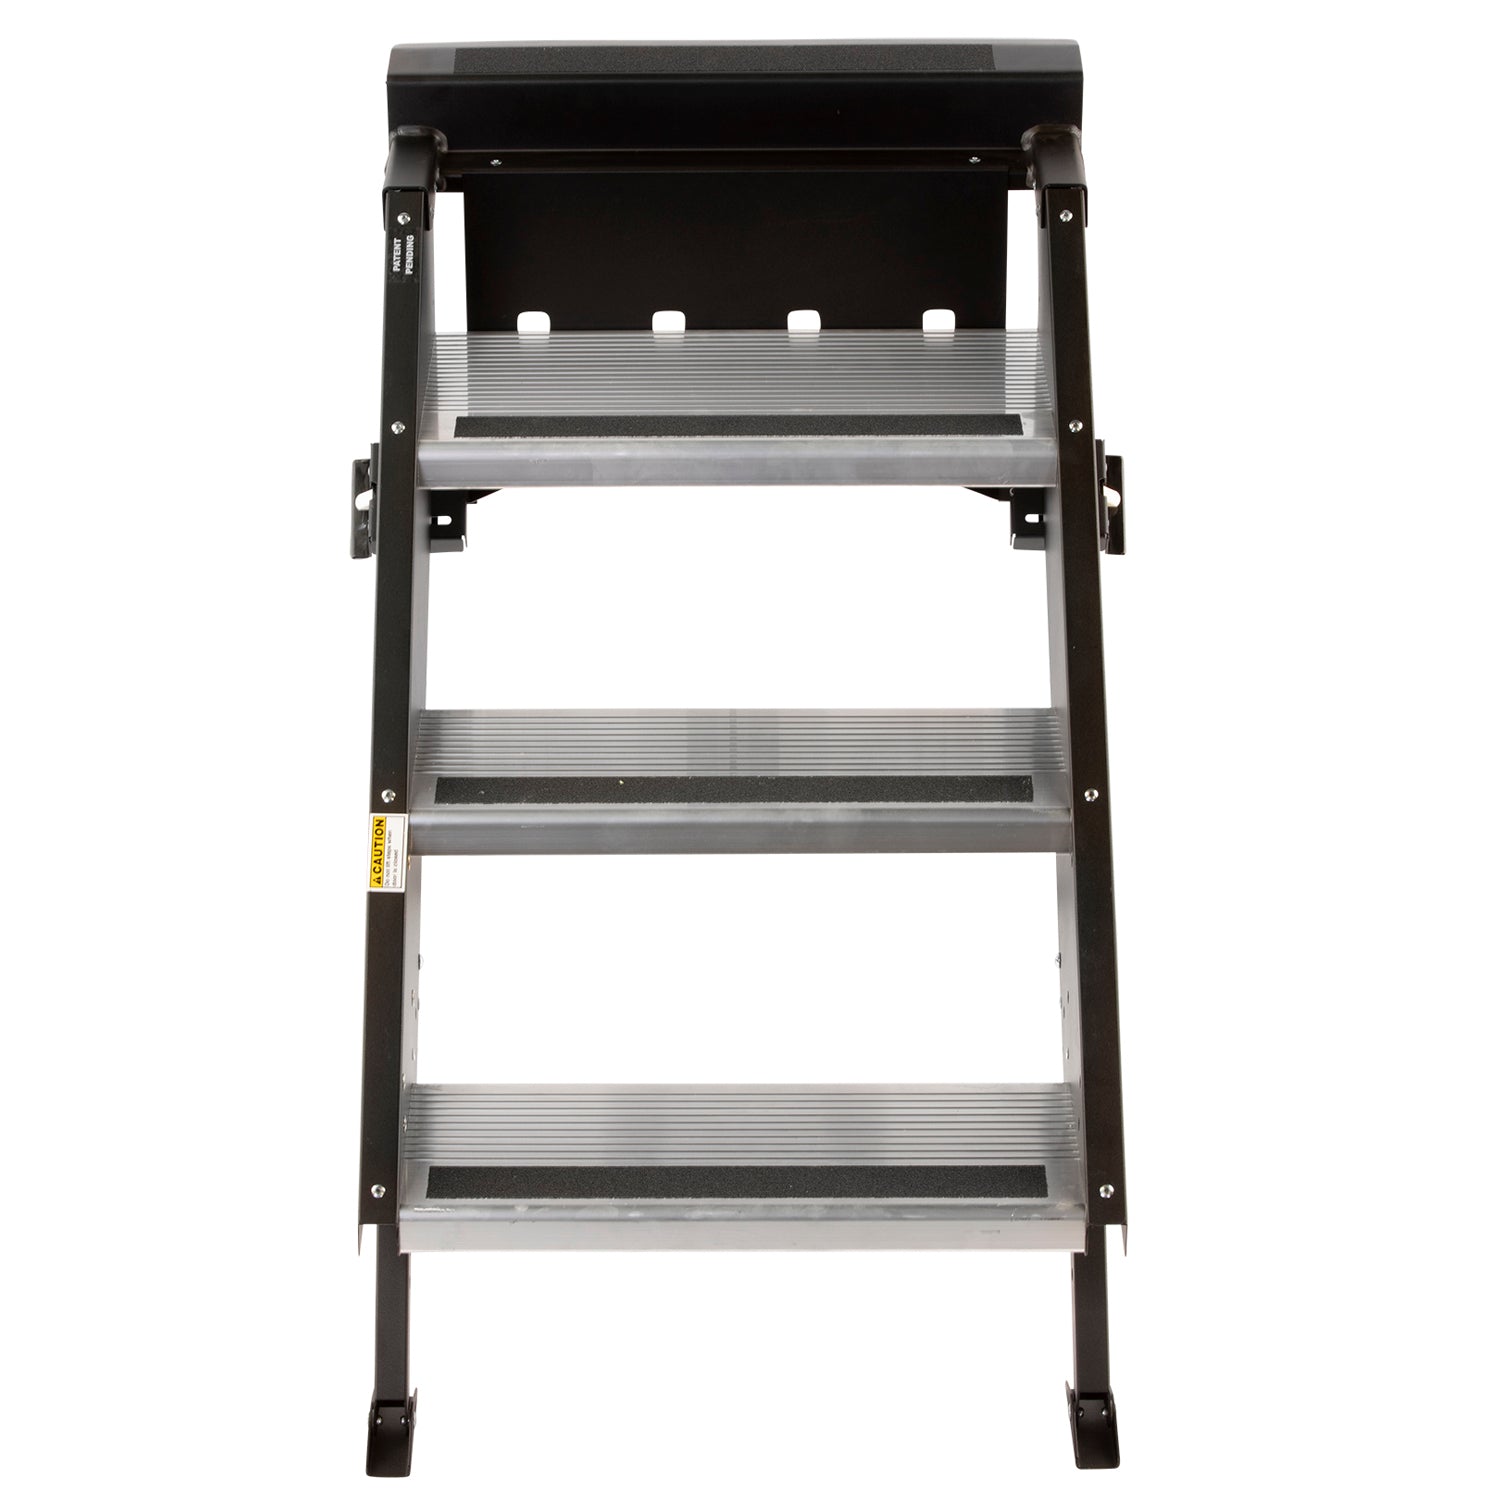 MORryde STP-208 StepAbove Fold-Up RV Entry Step - 3-Step (8" Step Rise), Fits 30" to 32" Door Width